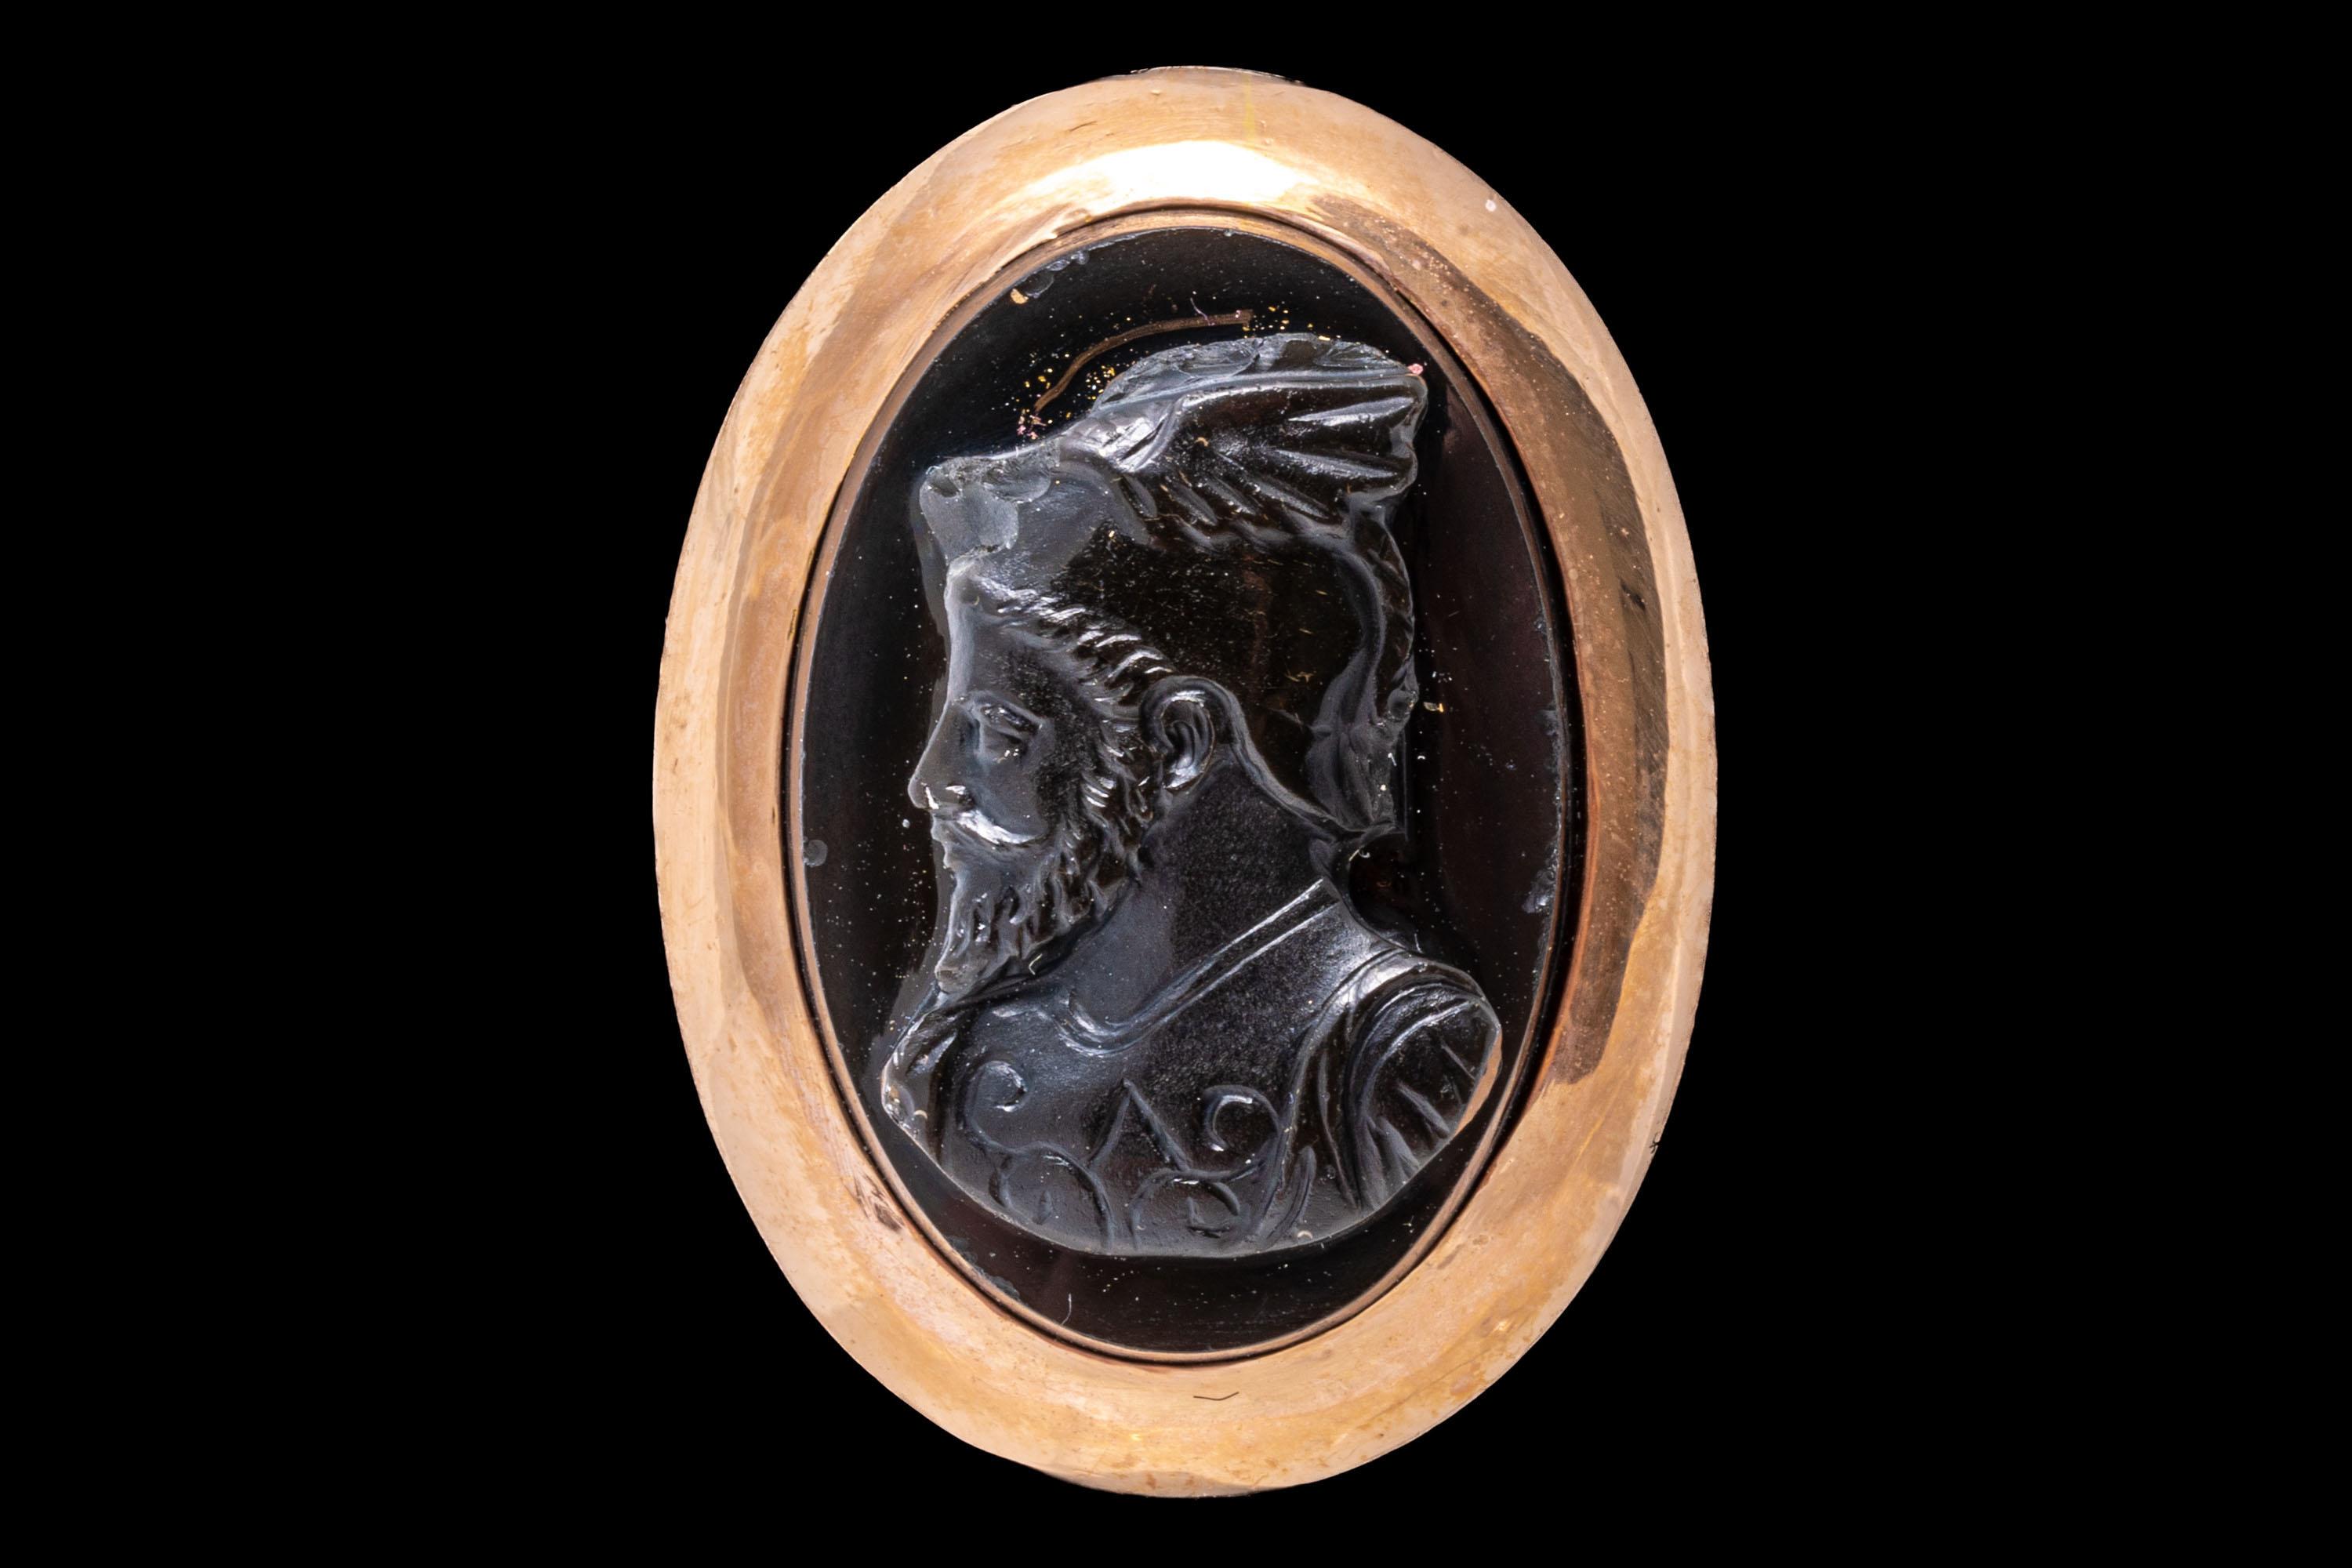 14k rose gold ring. This striking vintage oval black onyx cameo ring has a handsome bearded profile bust, facing to the left, and set off with a wide, high polished frame.
Marks: None, tests 14k
Dimensions: 5/8